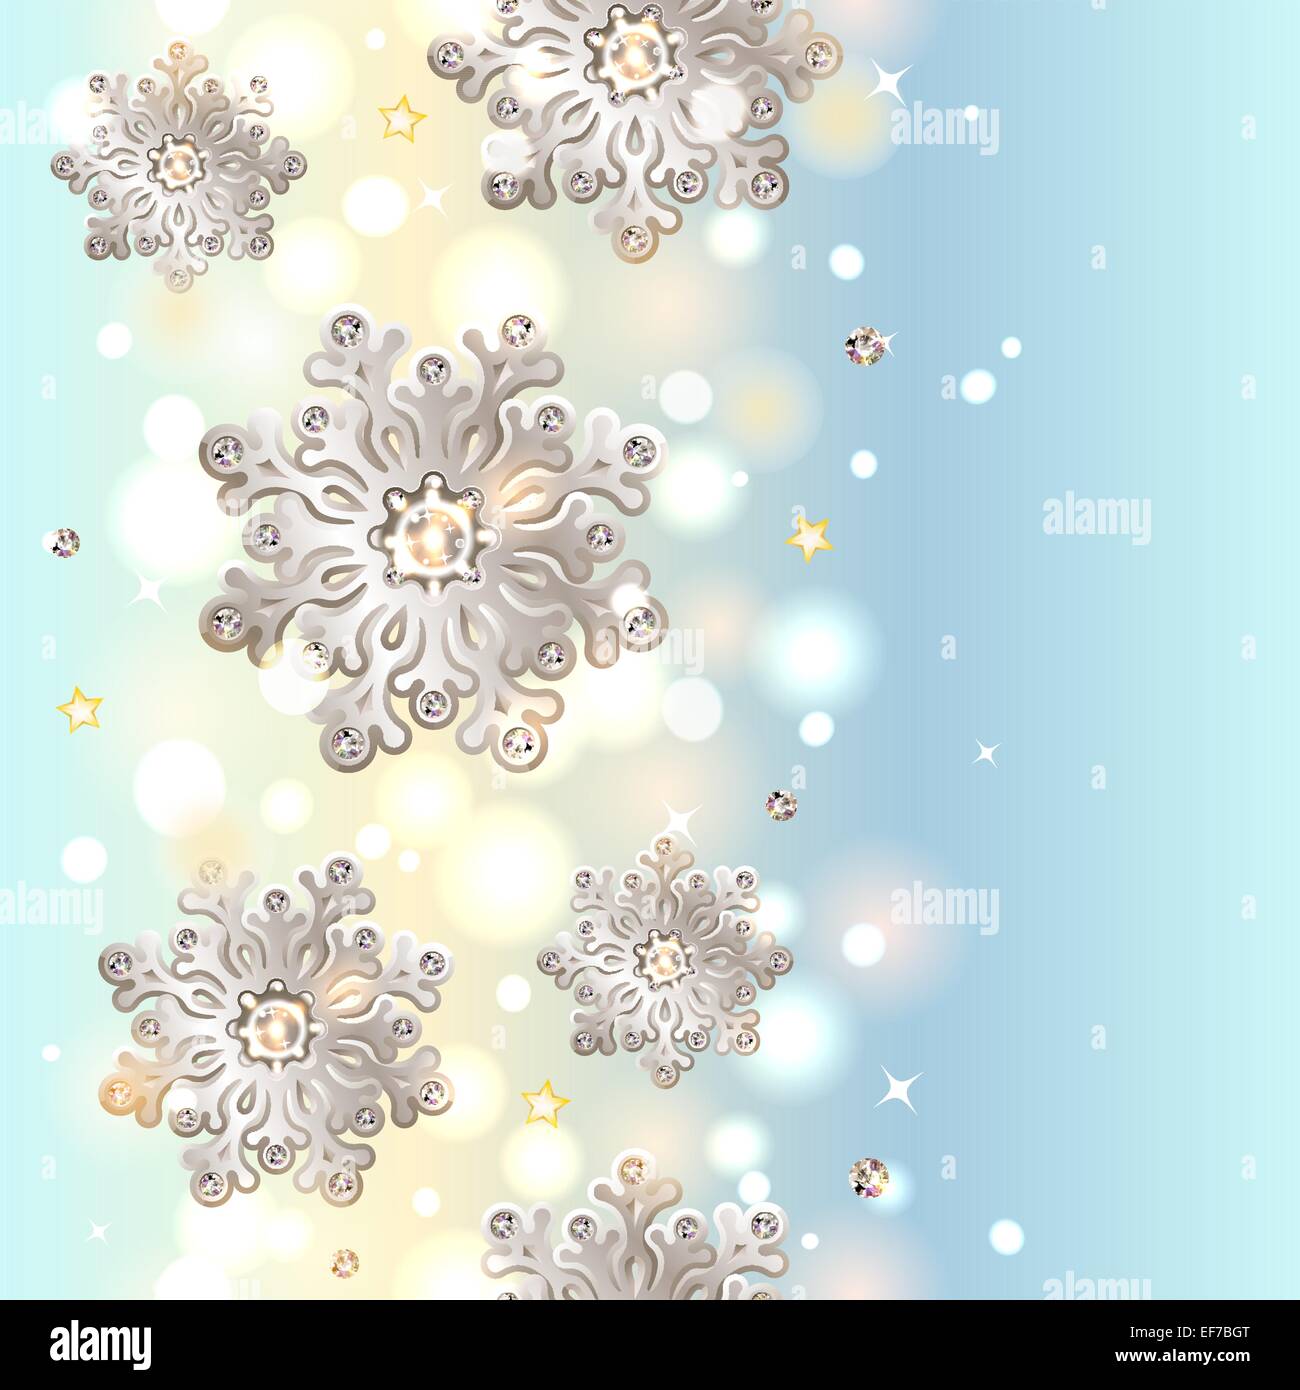 Shiny Blue Christmas Seamless Background With Silver Snowflakes